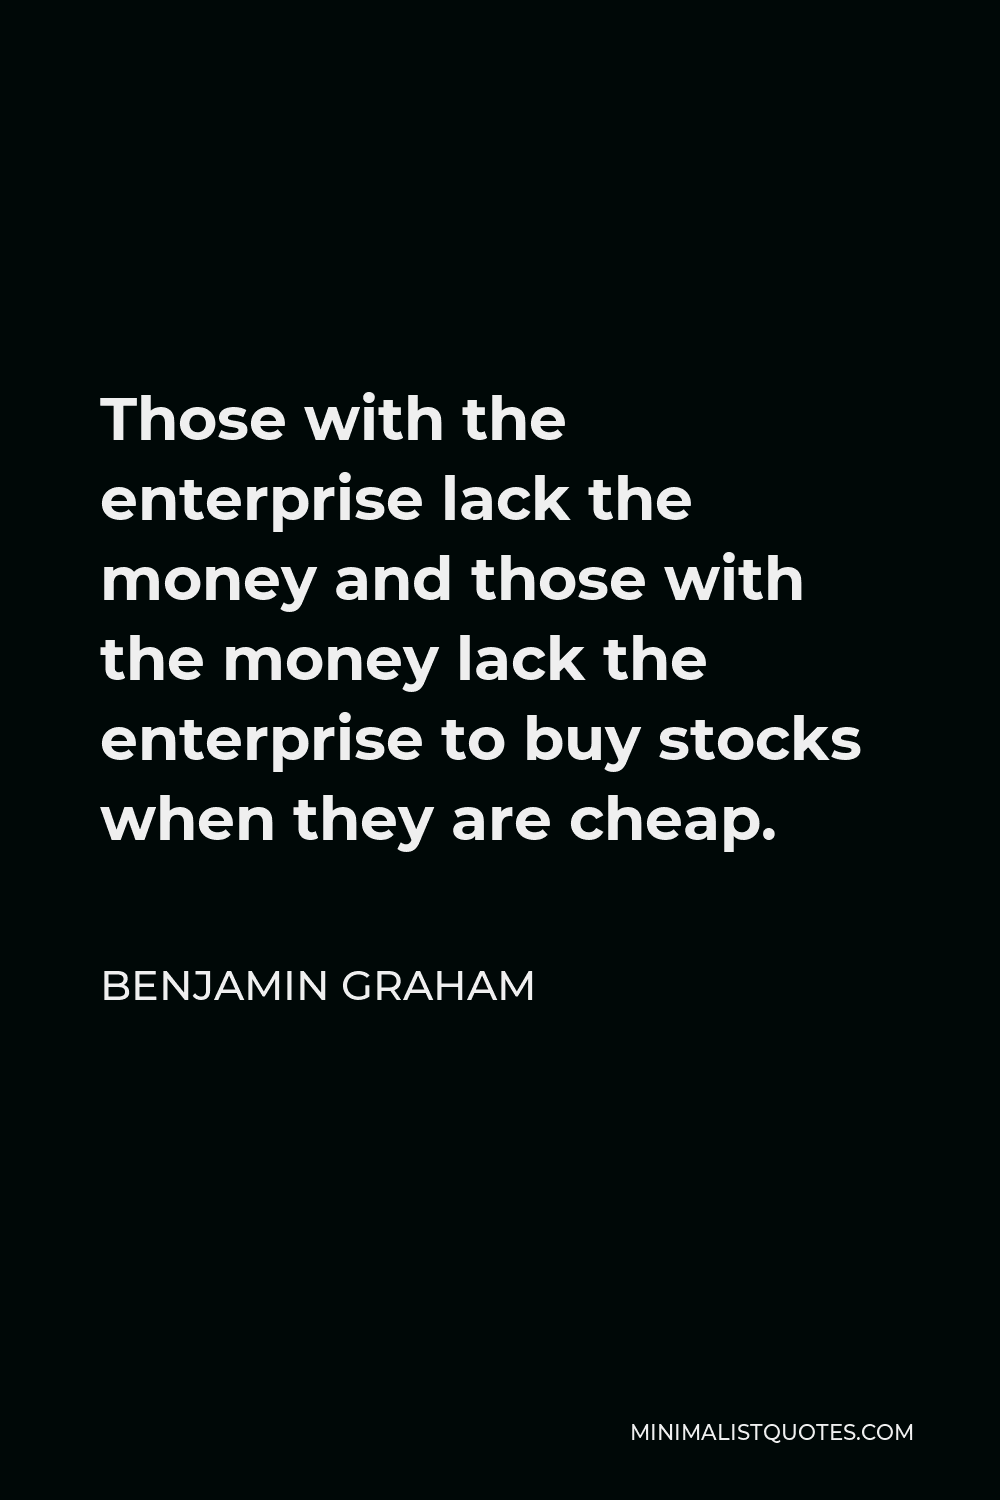 Benjamin Graham Quote - Those with the enterprise lack the money and those with the money lack the enterprise to buy stocks when they are cheap.